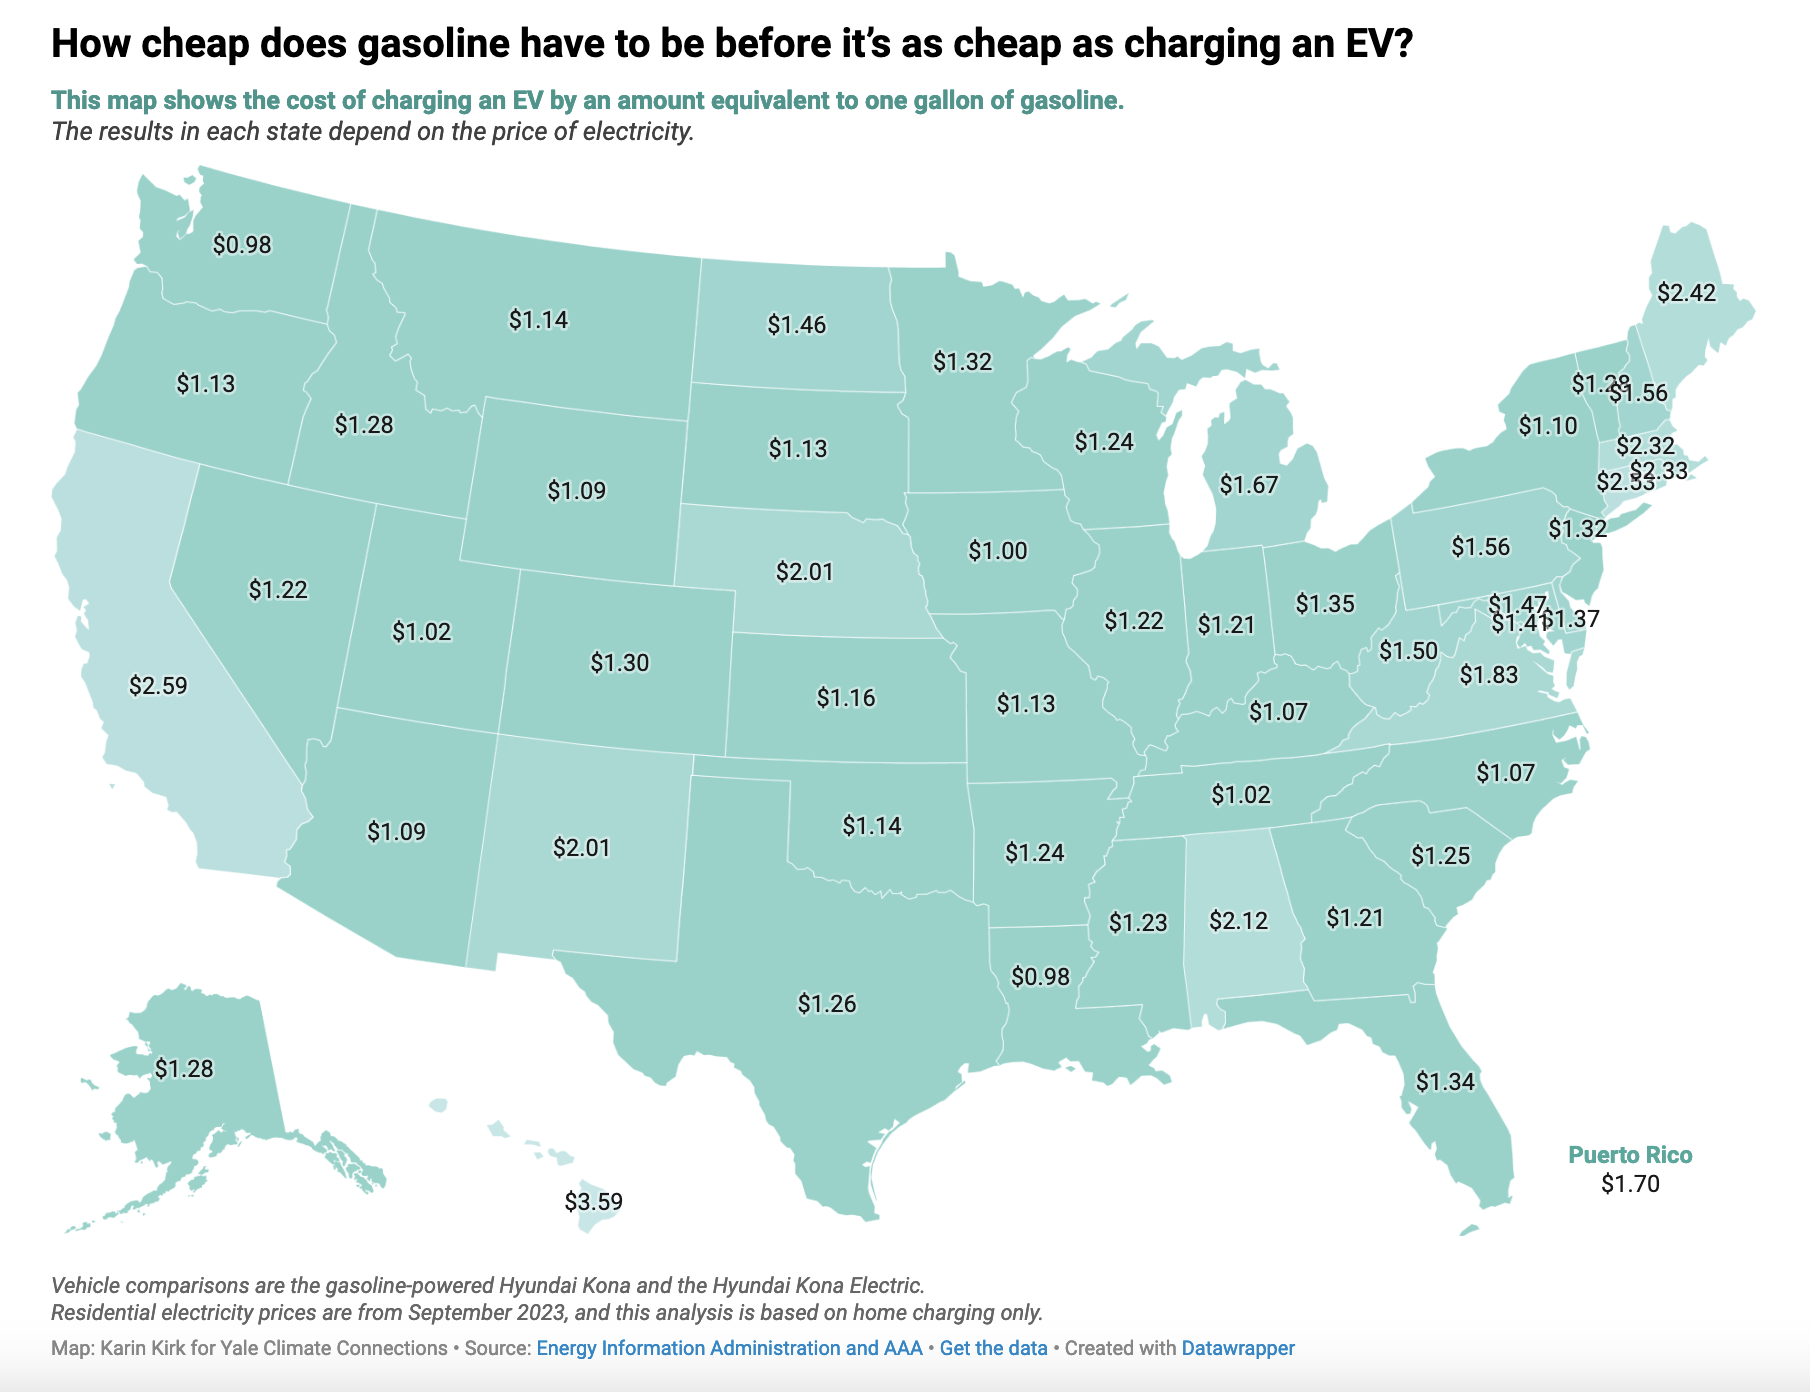 A map comparing the cost of gas to EV charging prices